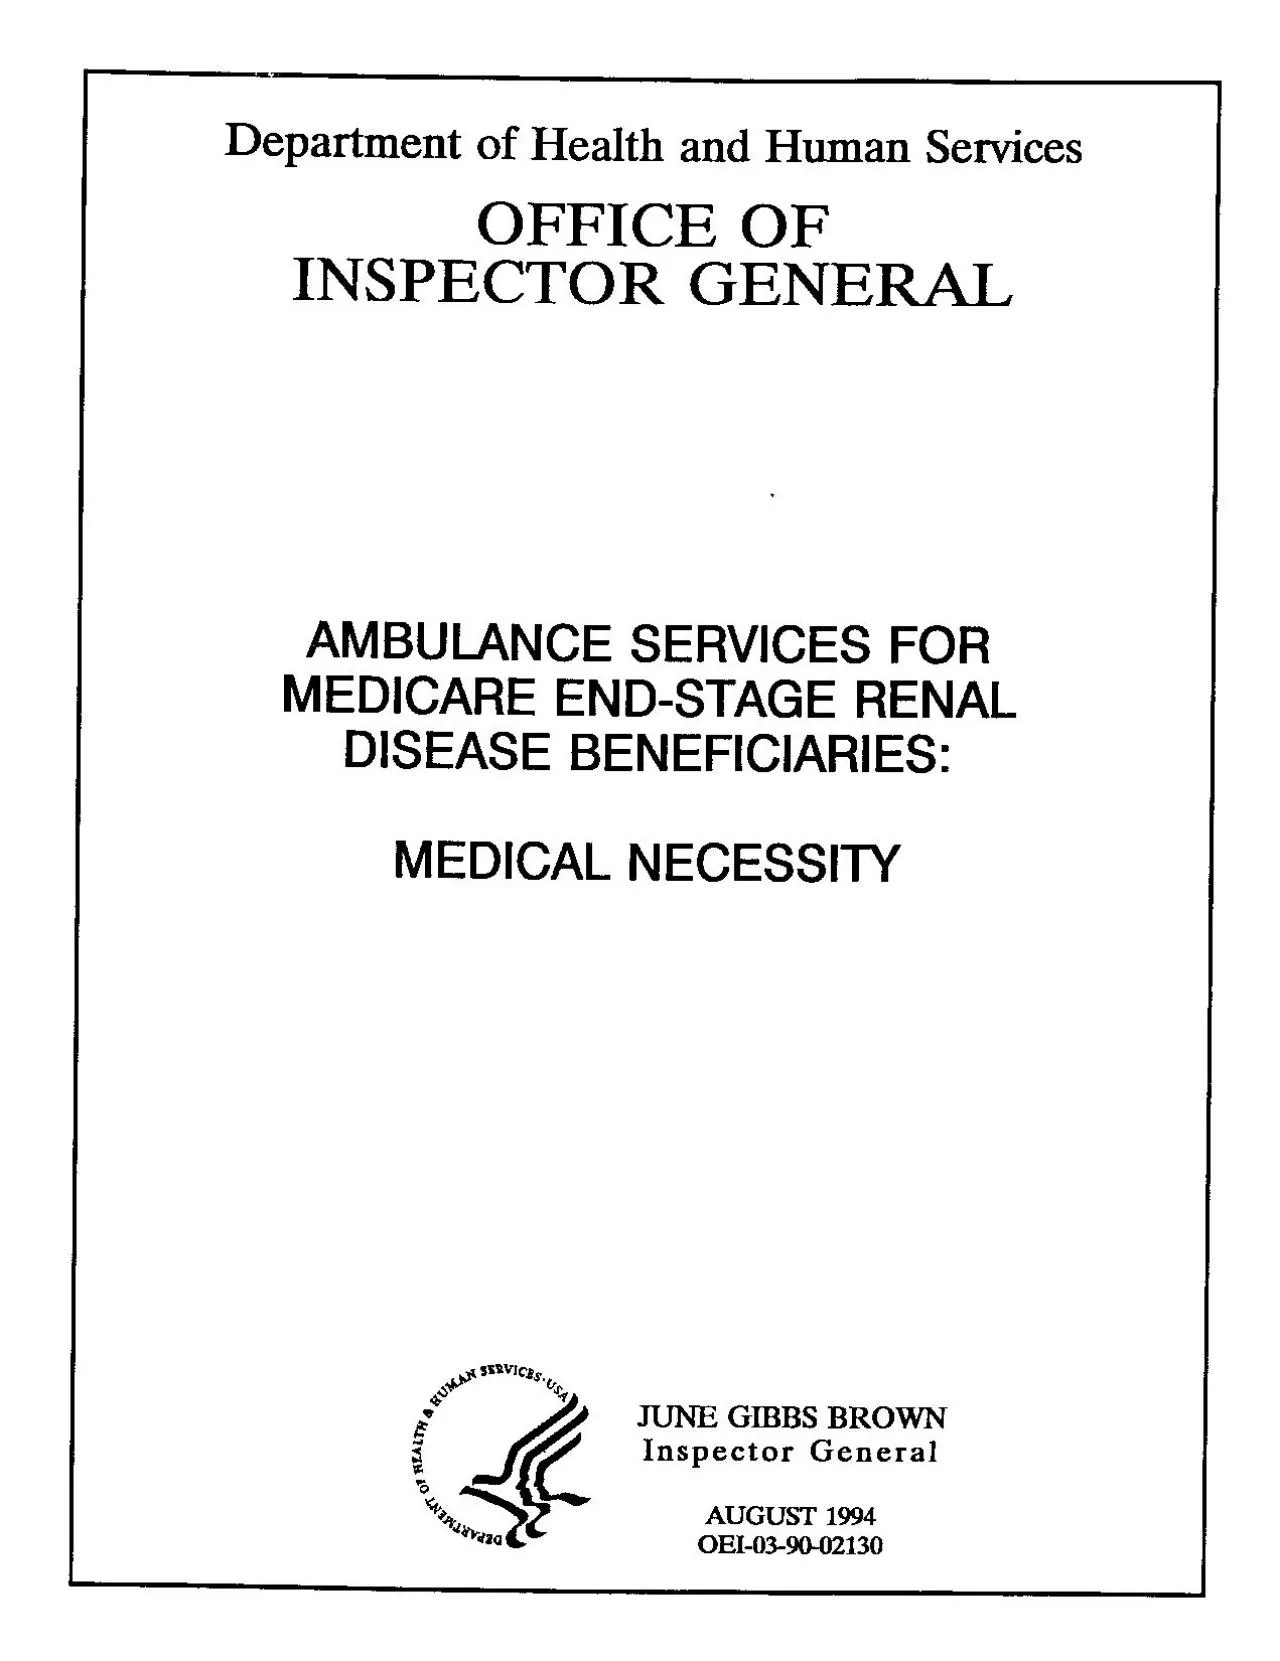 Department of Health and Human Services OFFICE OF INSPECTOR GENERAL AM